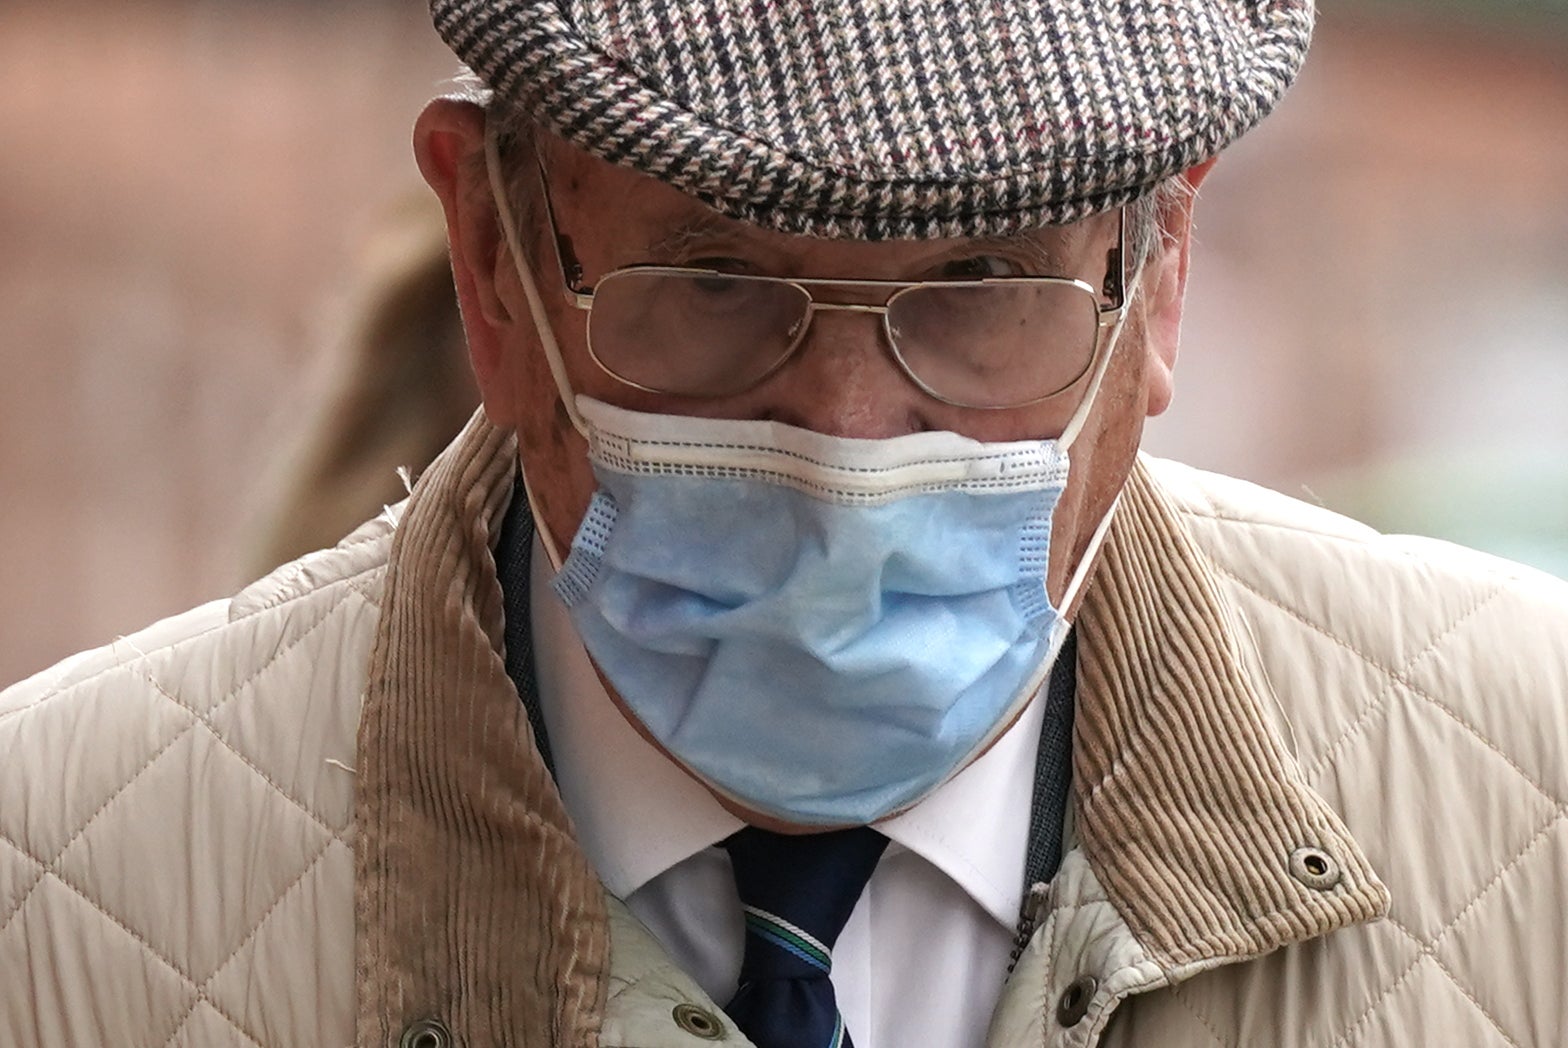 David Venables, 89, arrives at Worcester Crown Court, where he is accused of murdering his wife Brenda (Jacob King/PA)